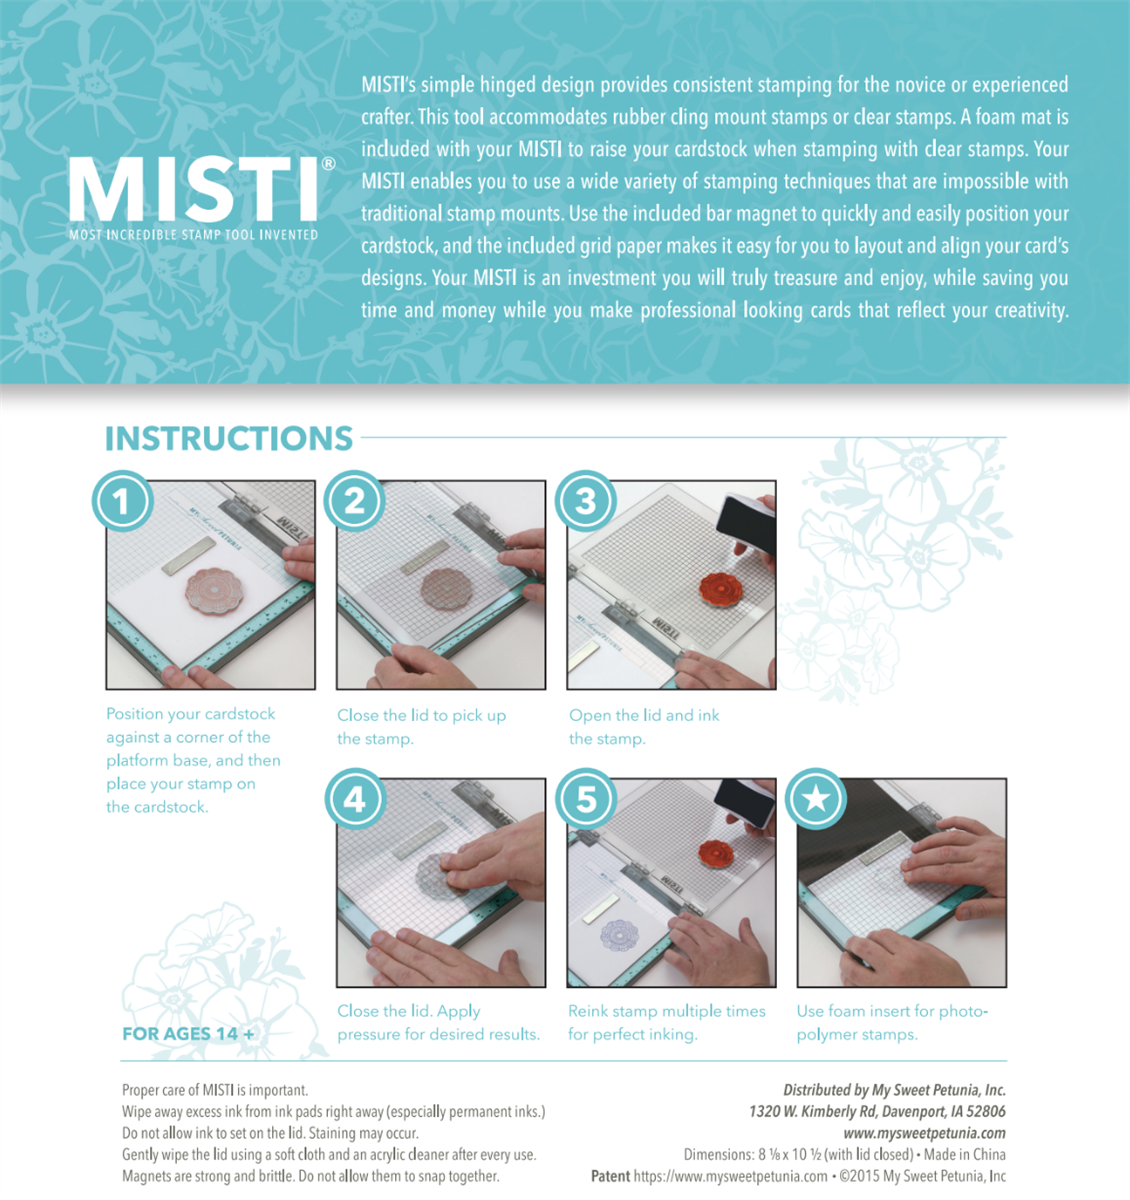 How to: 10 Stamping Platform Tips to use with your Misti or